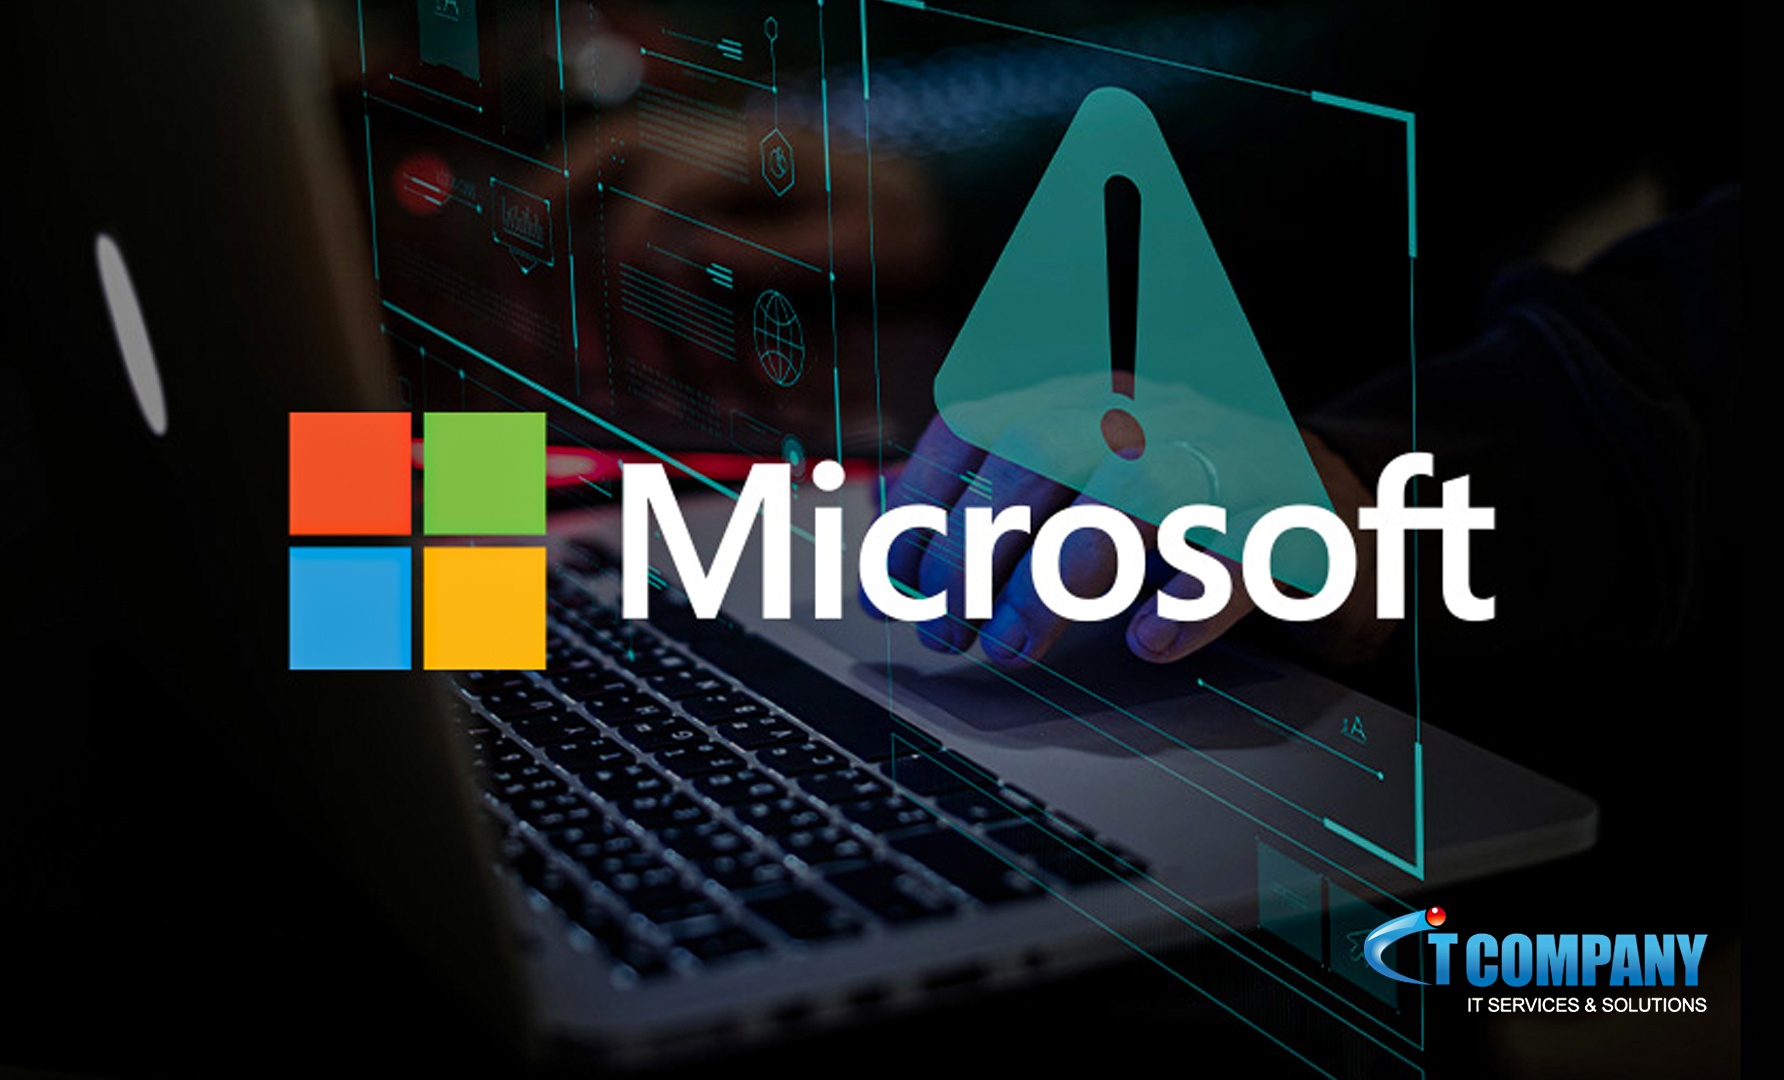 Microsoft’s Patch Tuesday for April addresses 2 zero-day vulnerabilities